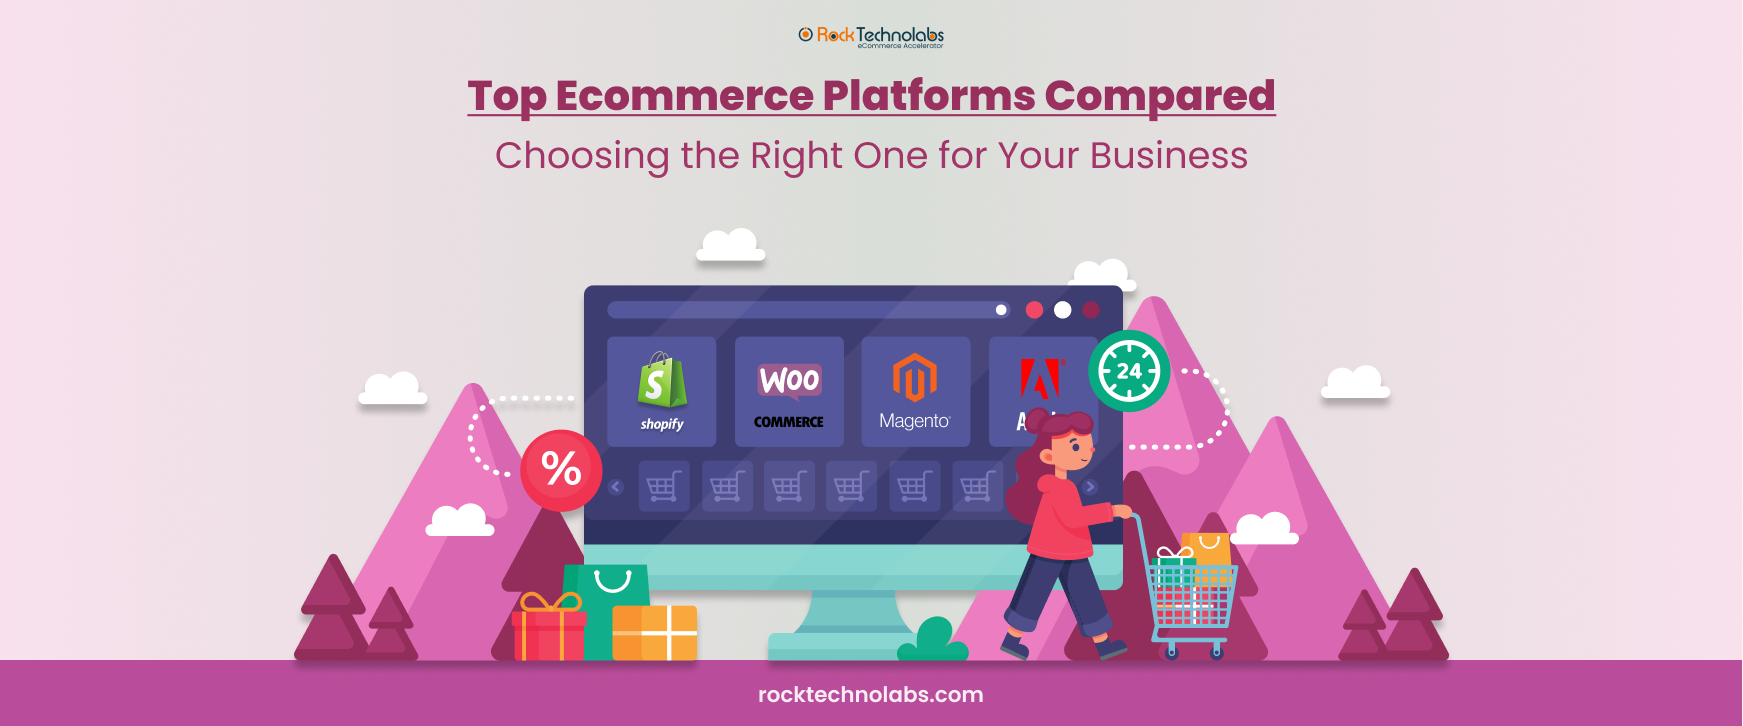 Top Ecommerce Platforms Compared Choosing the Right One for Your Business Banner